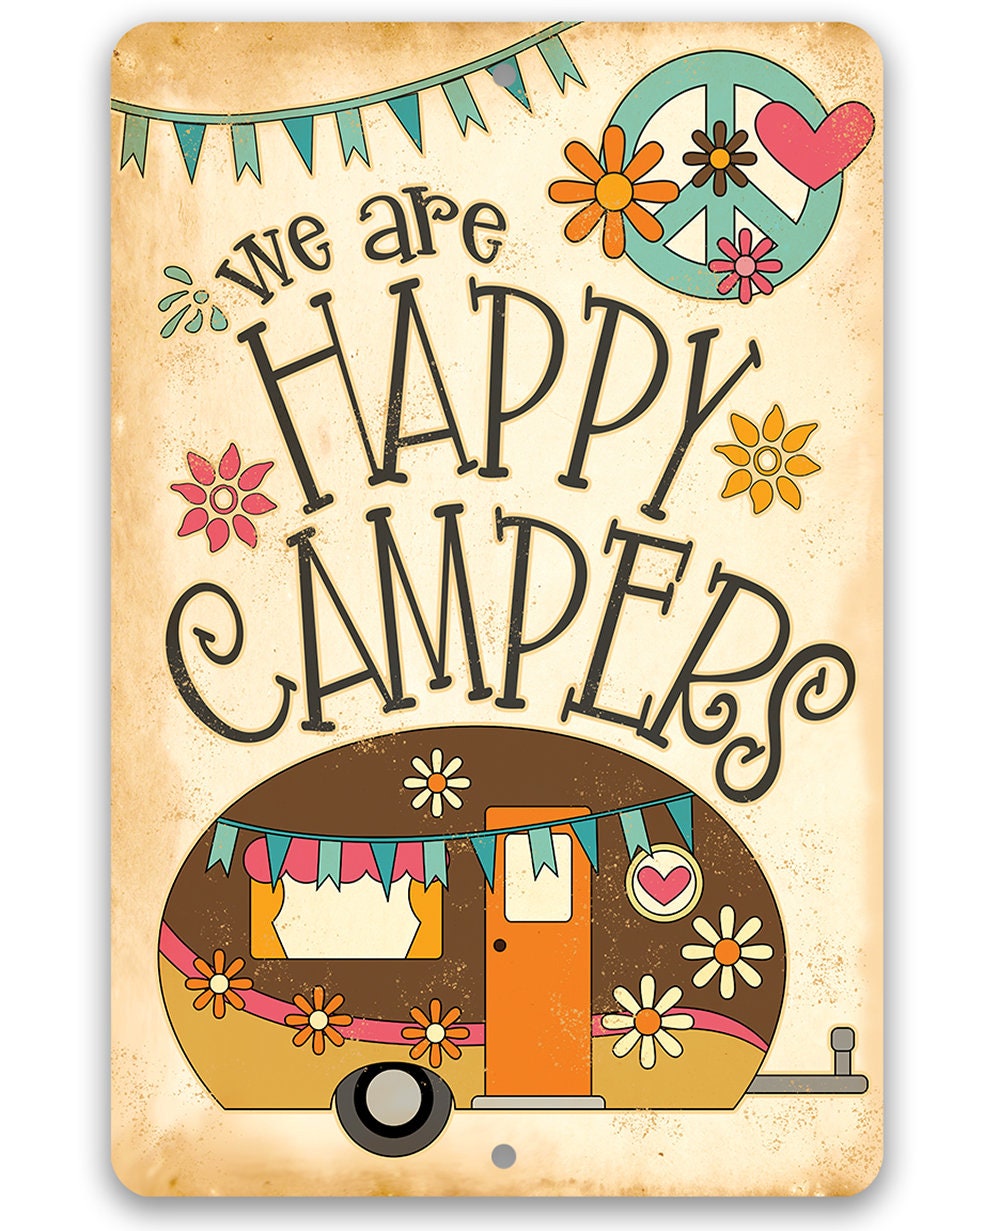 We Are Happy Campers - 8" x 12" or 12" x 18" Aluminum Tin Awesome Metal Poster Lone Star Art 